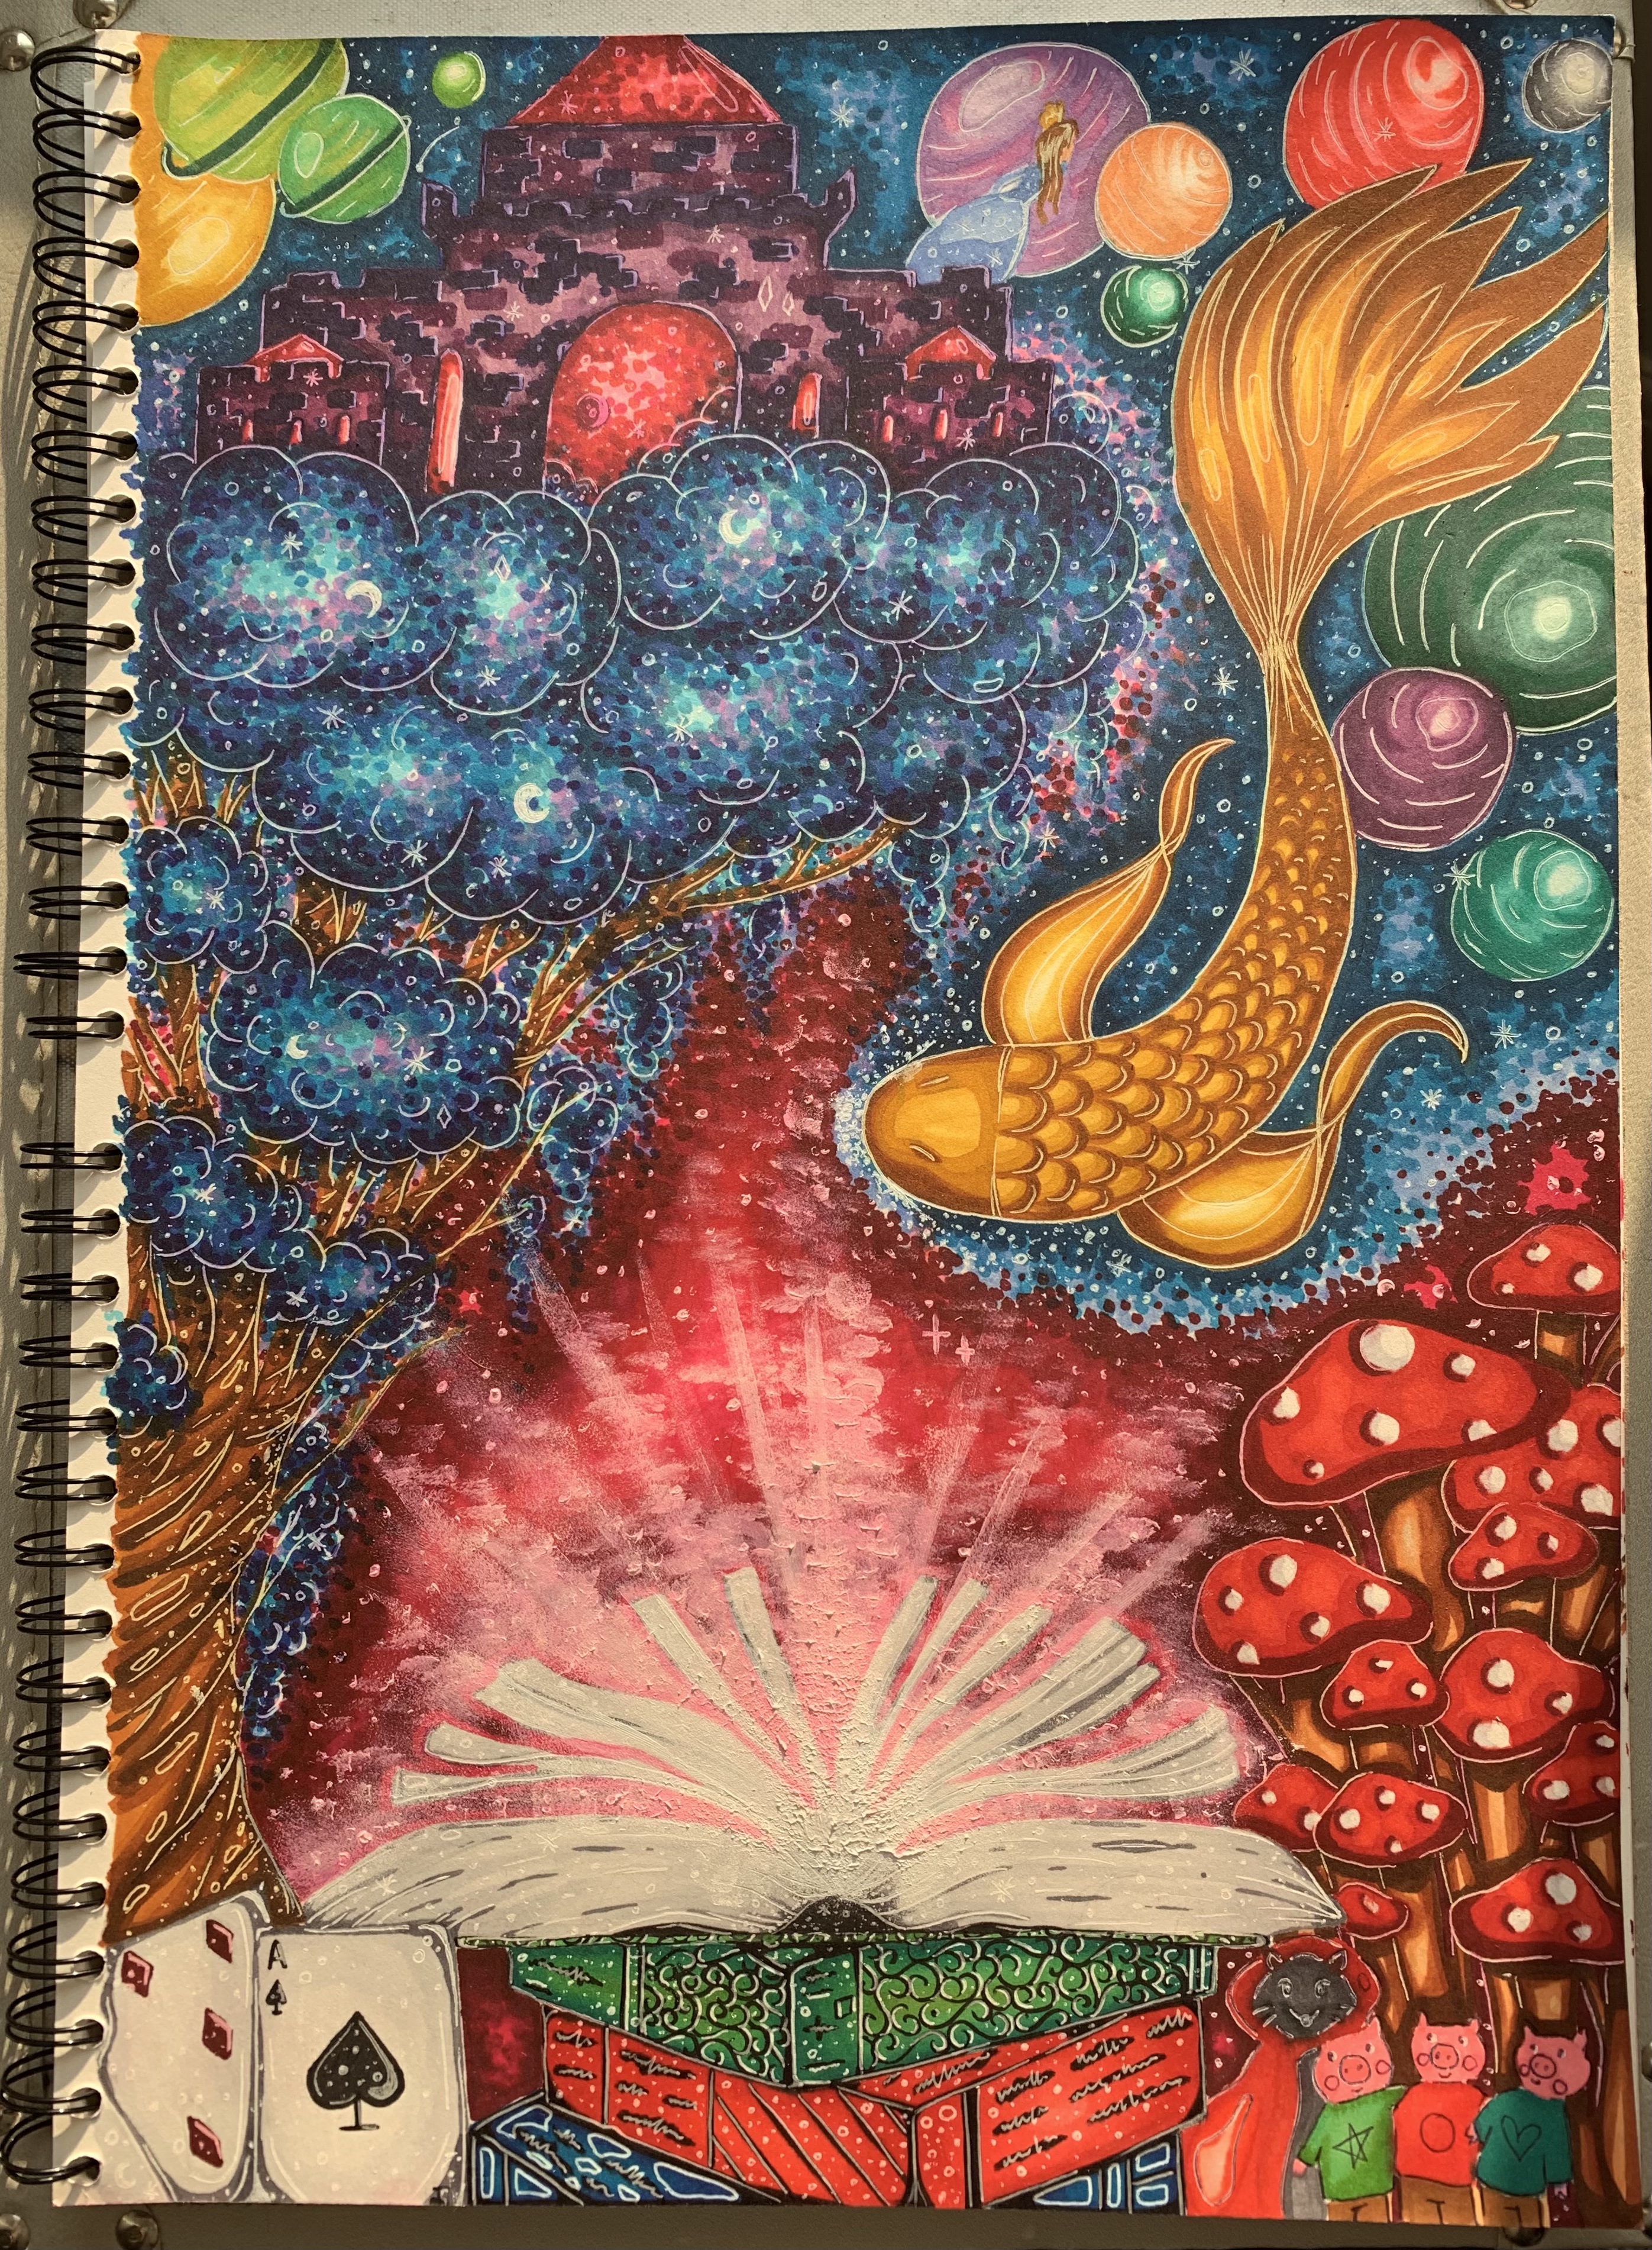 A photograph taken of a colourful painting in an A4 notebook. At the centre there is a book with the pages open with light shining from it. A golden fish swims down on the right, and there are toadstools and a deck of cards along the bottom of the page.